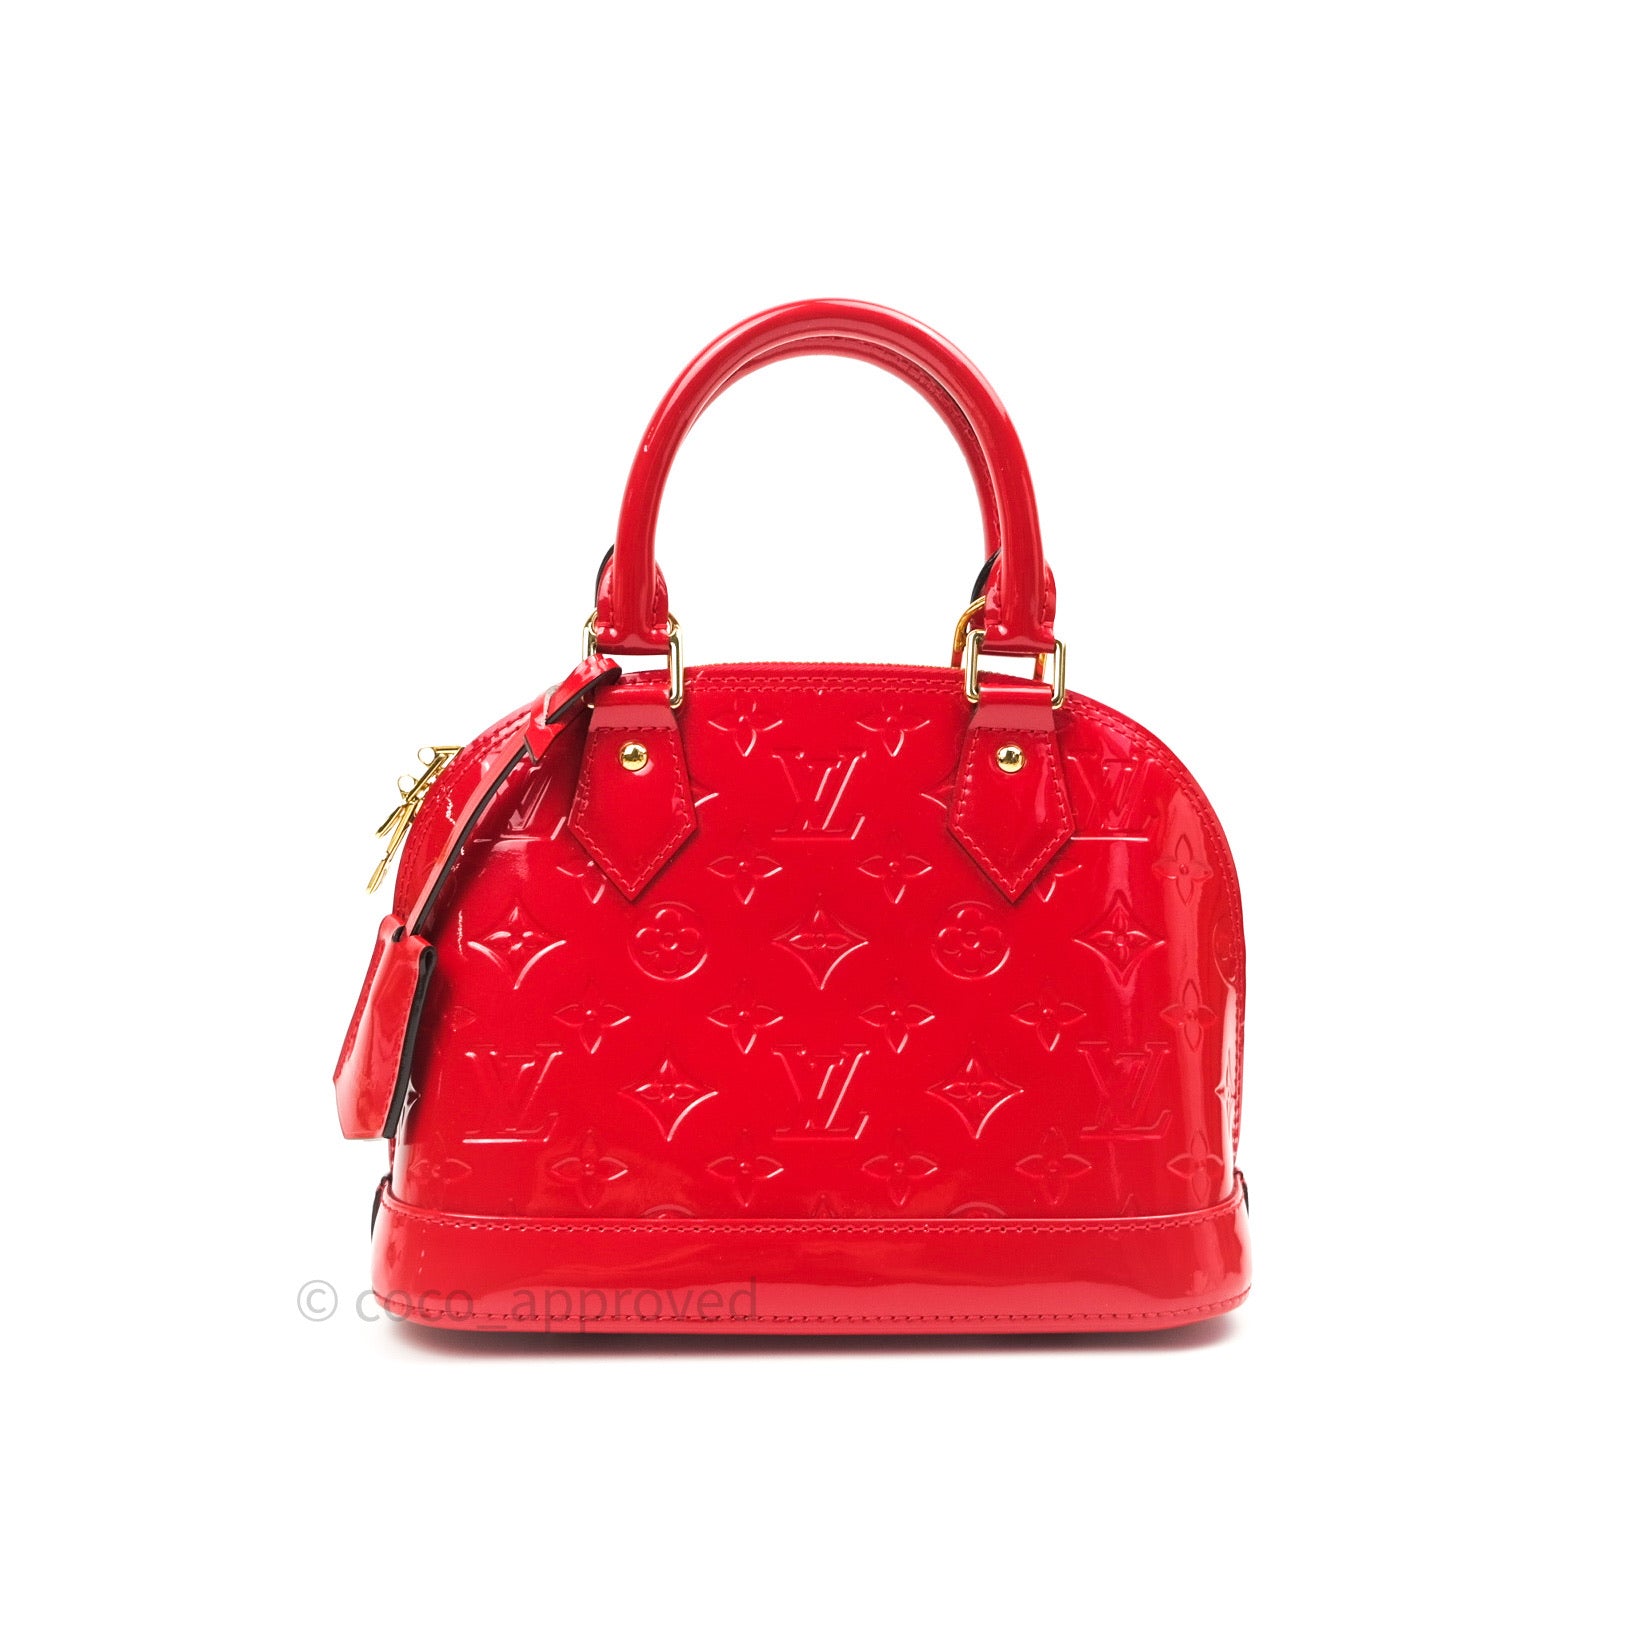 Louis Vuitton Alma BB Red Monogram Vernis Leather – Coco Approved